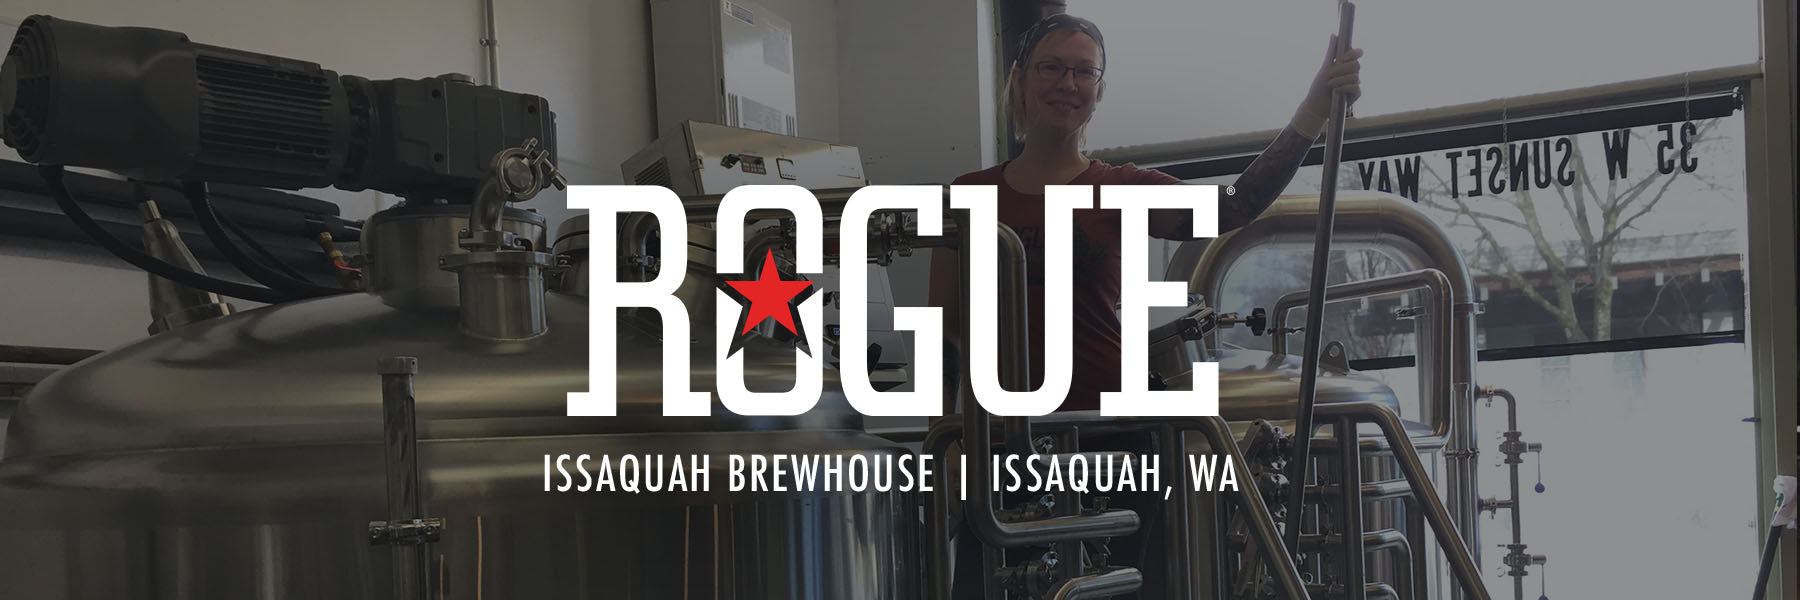 Rogue Ales | Issaquah 5bbl Brewhouse